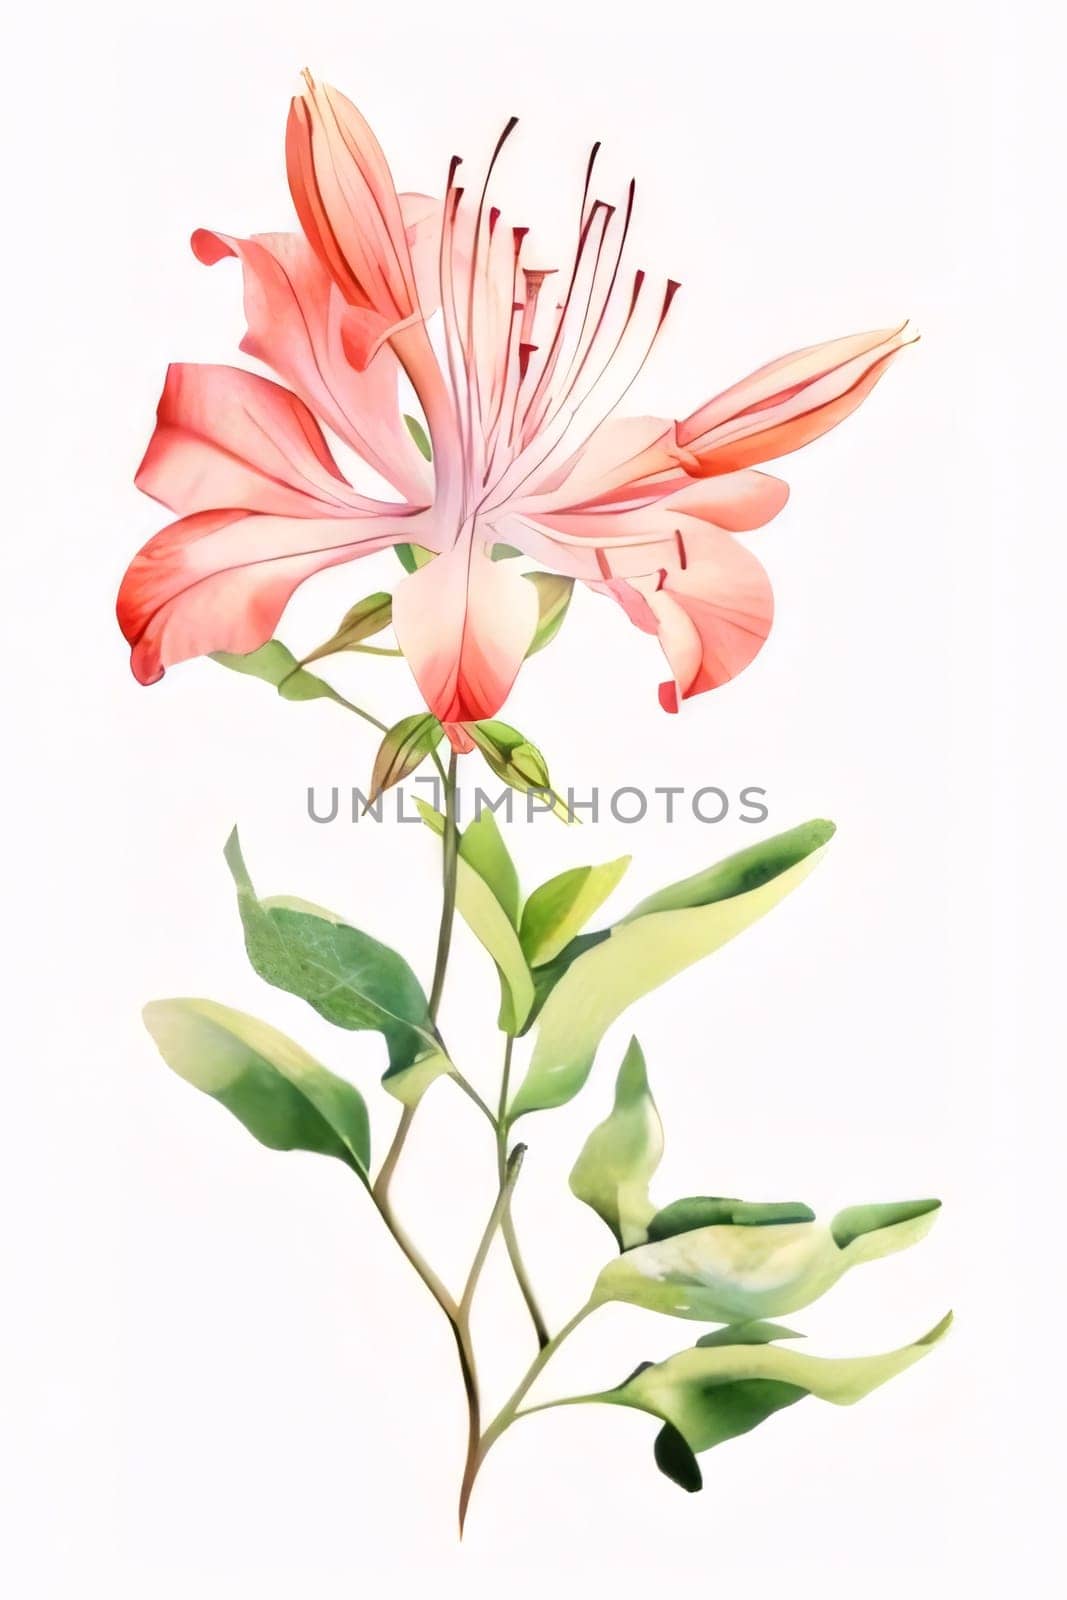 Drawn, painted red flower on isolated white background. Flowering flowers, a symbol of spring, new life. A joyful time of nature waking up to life.